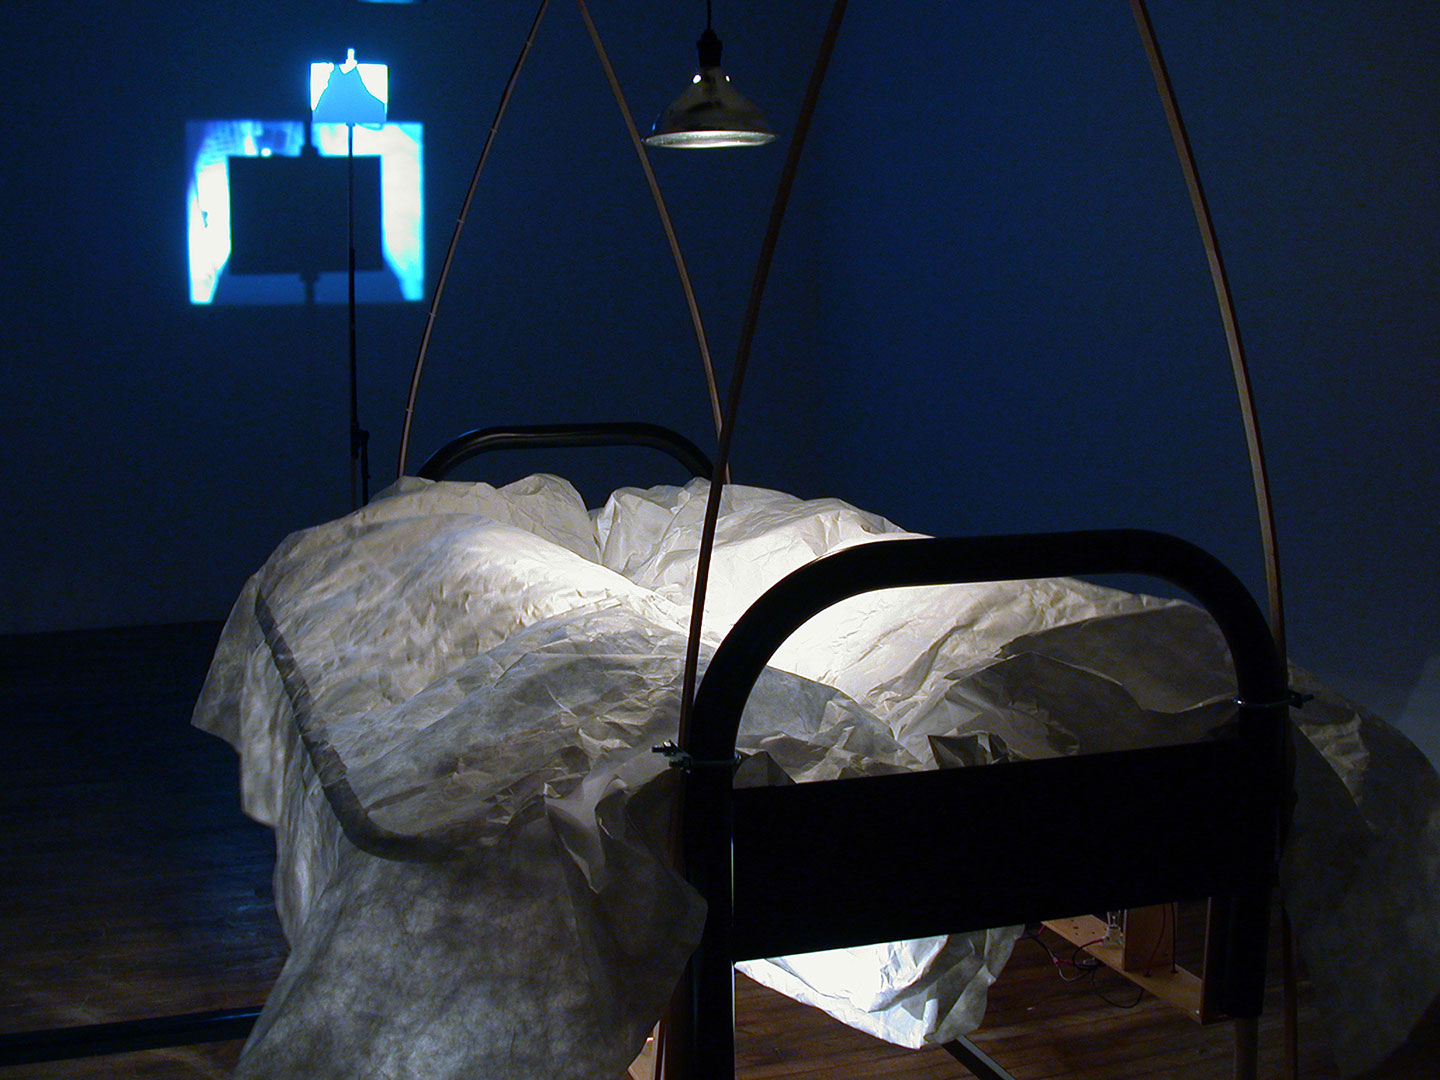 Diane Landry, The Magic Shield (detail), 2005, installation with automation, 2 futon-frame-beds, motors, selected objects, aluminum, wood, halogen lamp, MIDI controller, computer.